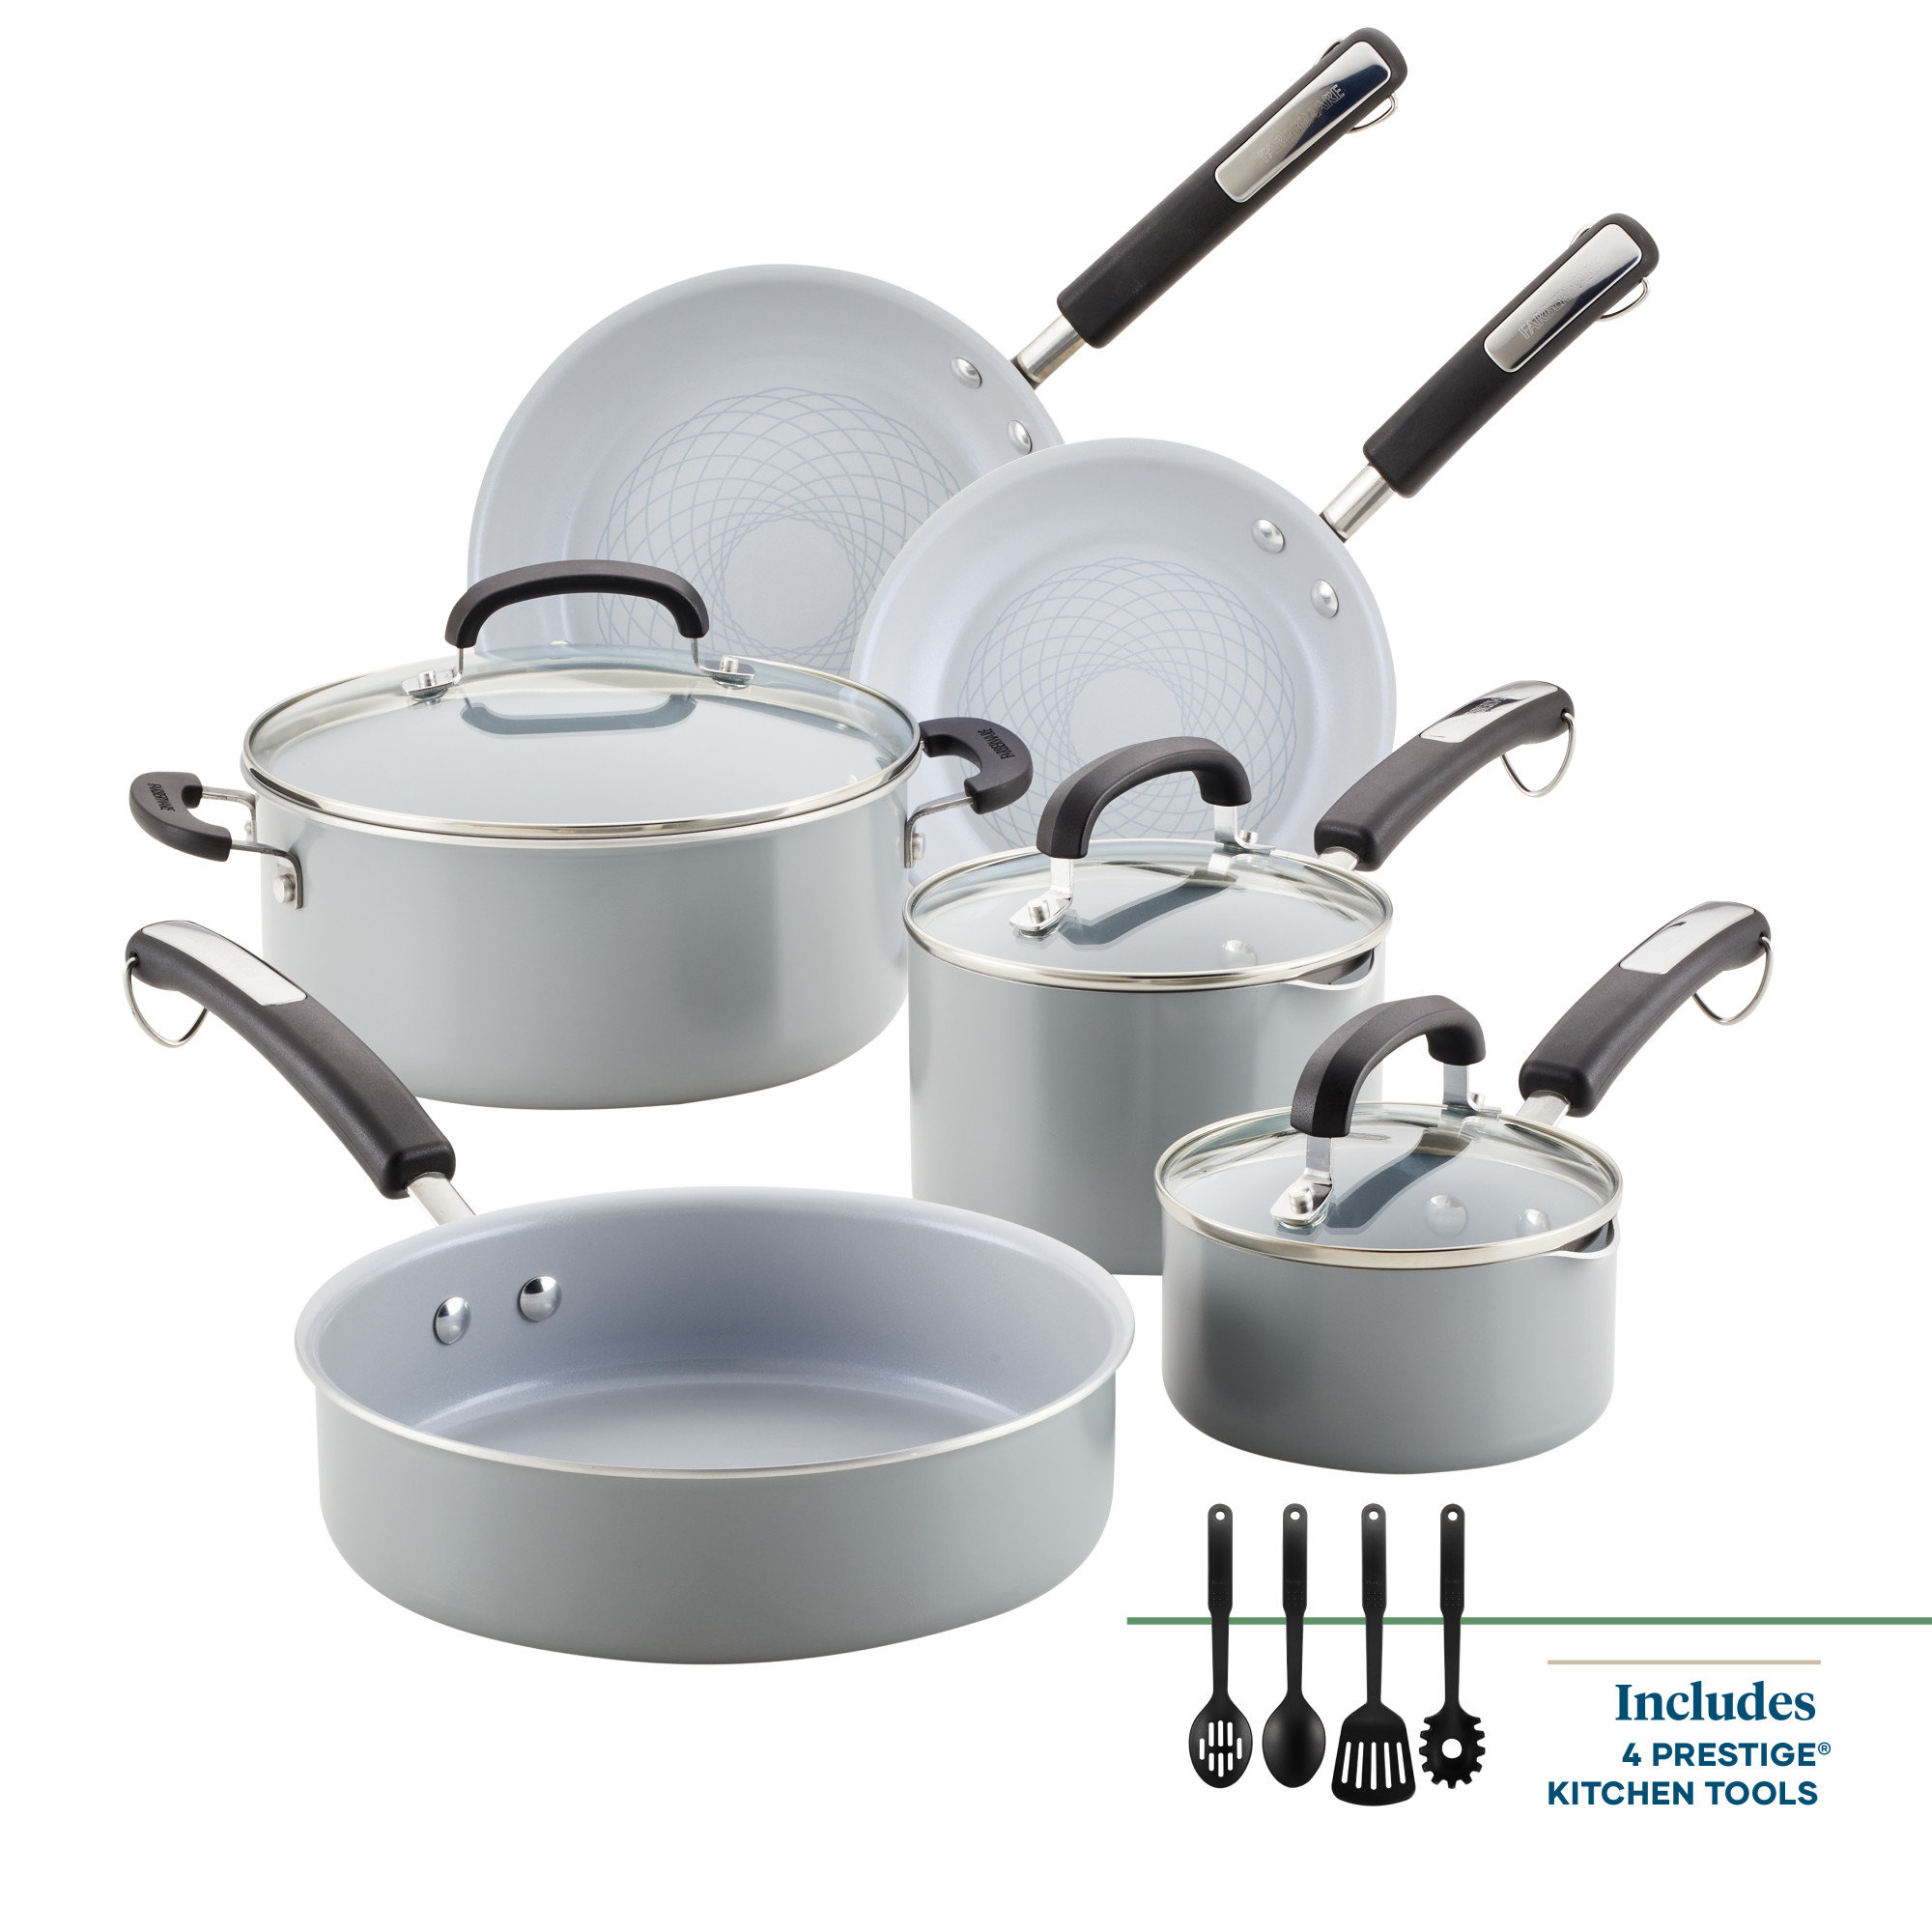 Ecology Center - Need help buying a new pan? We've got you covered with our  guide and recommendations for buying non-toxic cookware. Read the full  report at